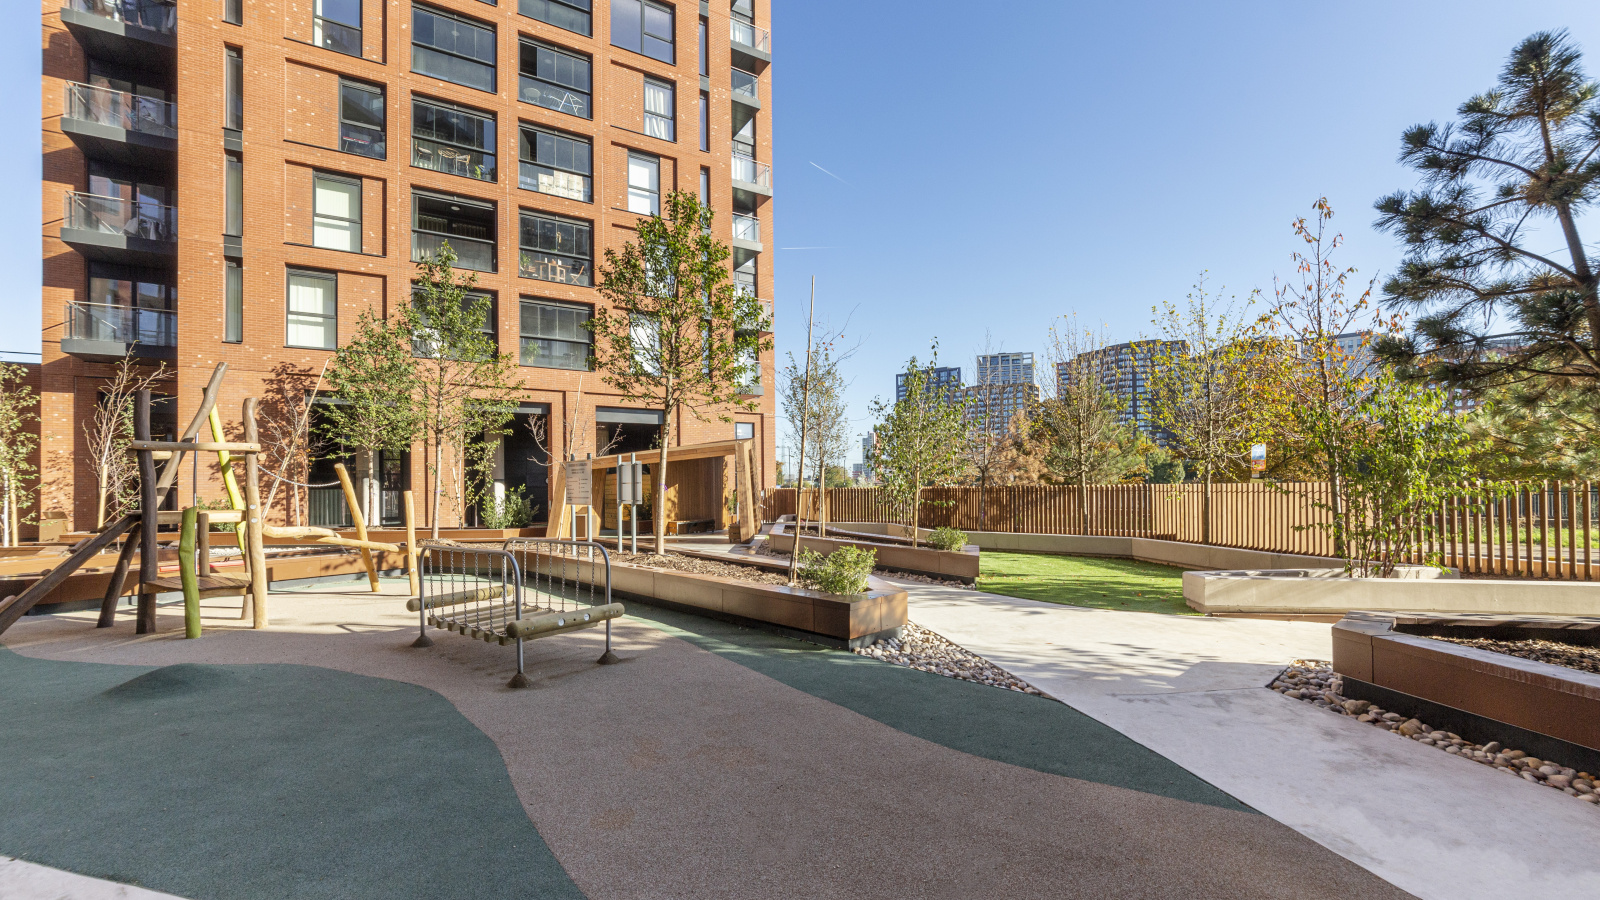 Gallery Orchard Wharf